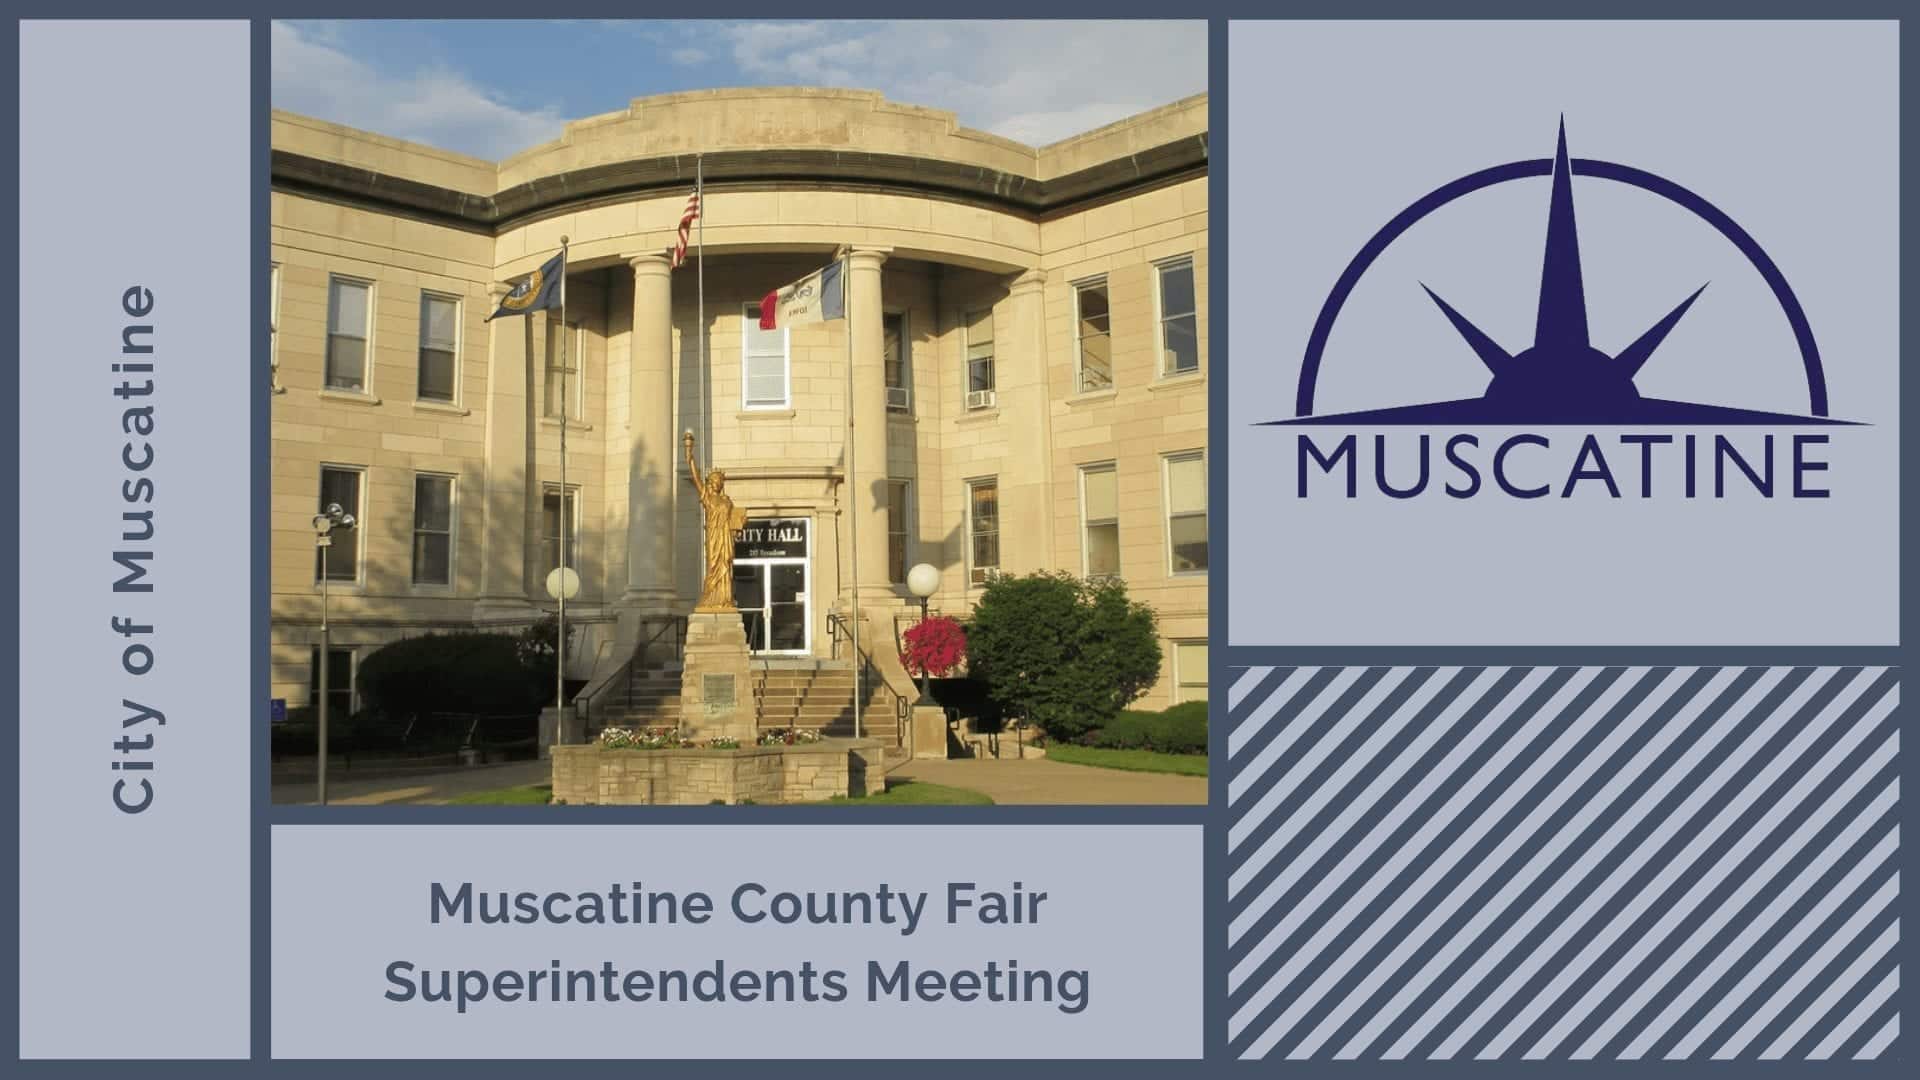 Muscatine County Fair Superintendents Meeting